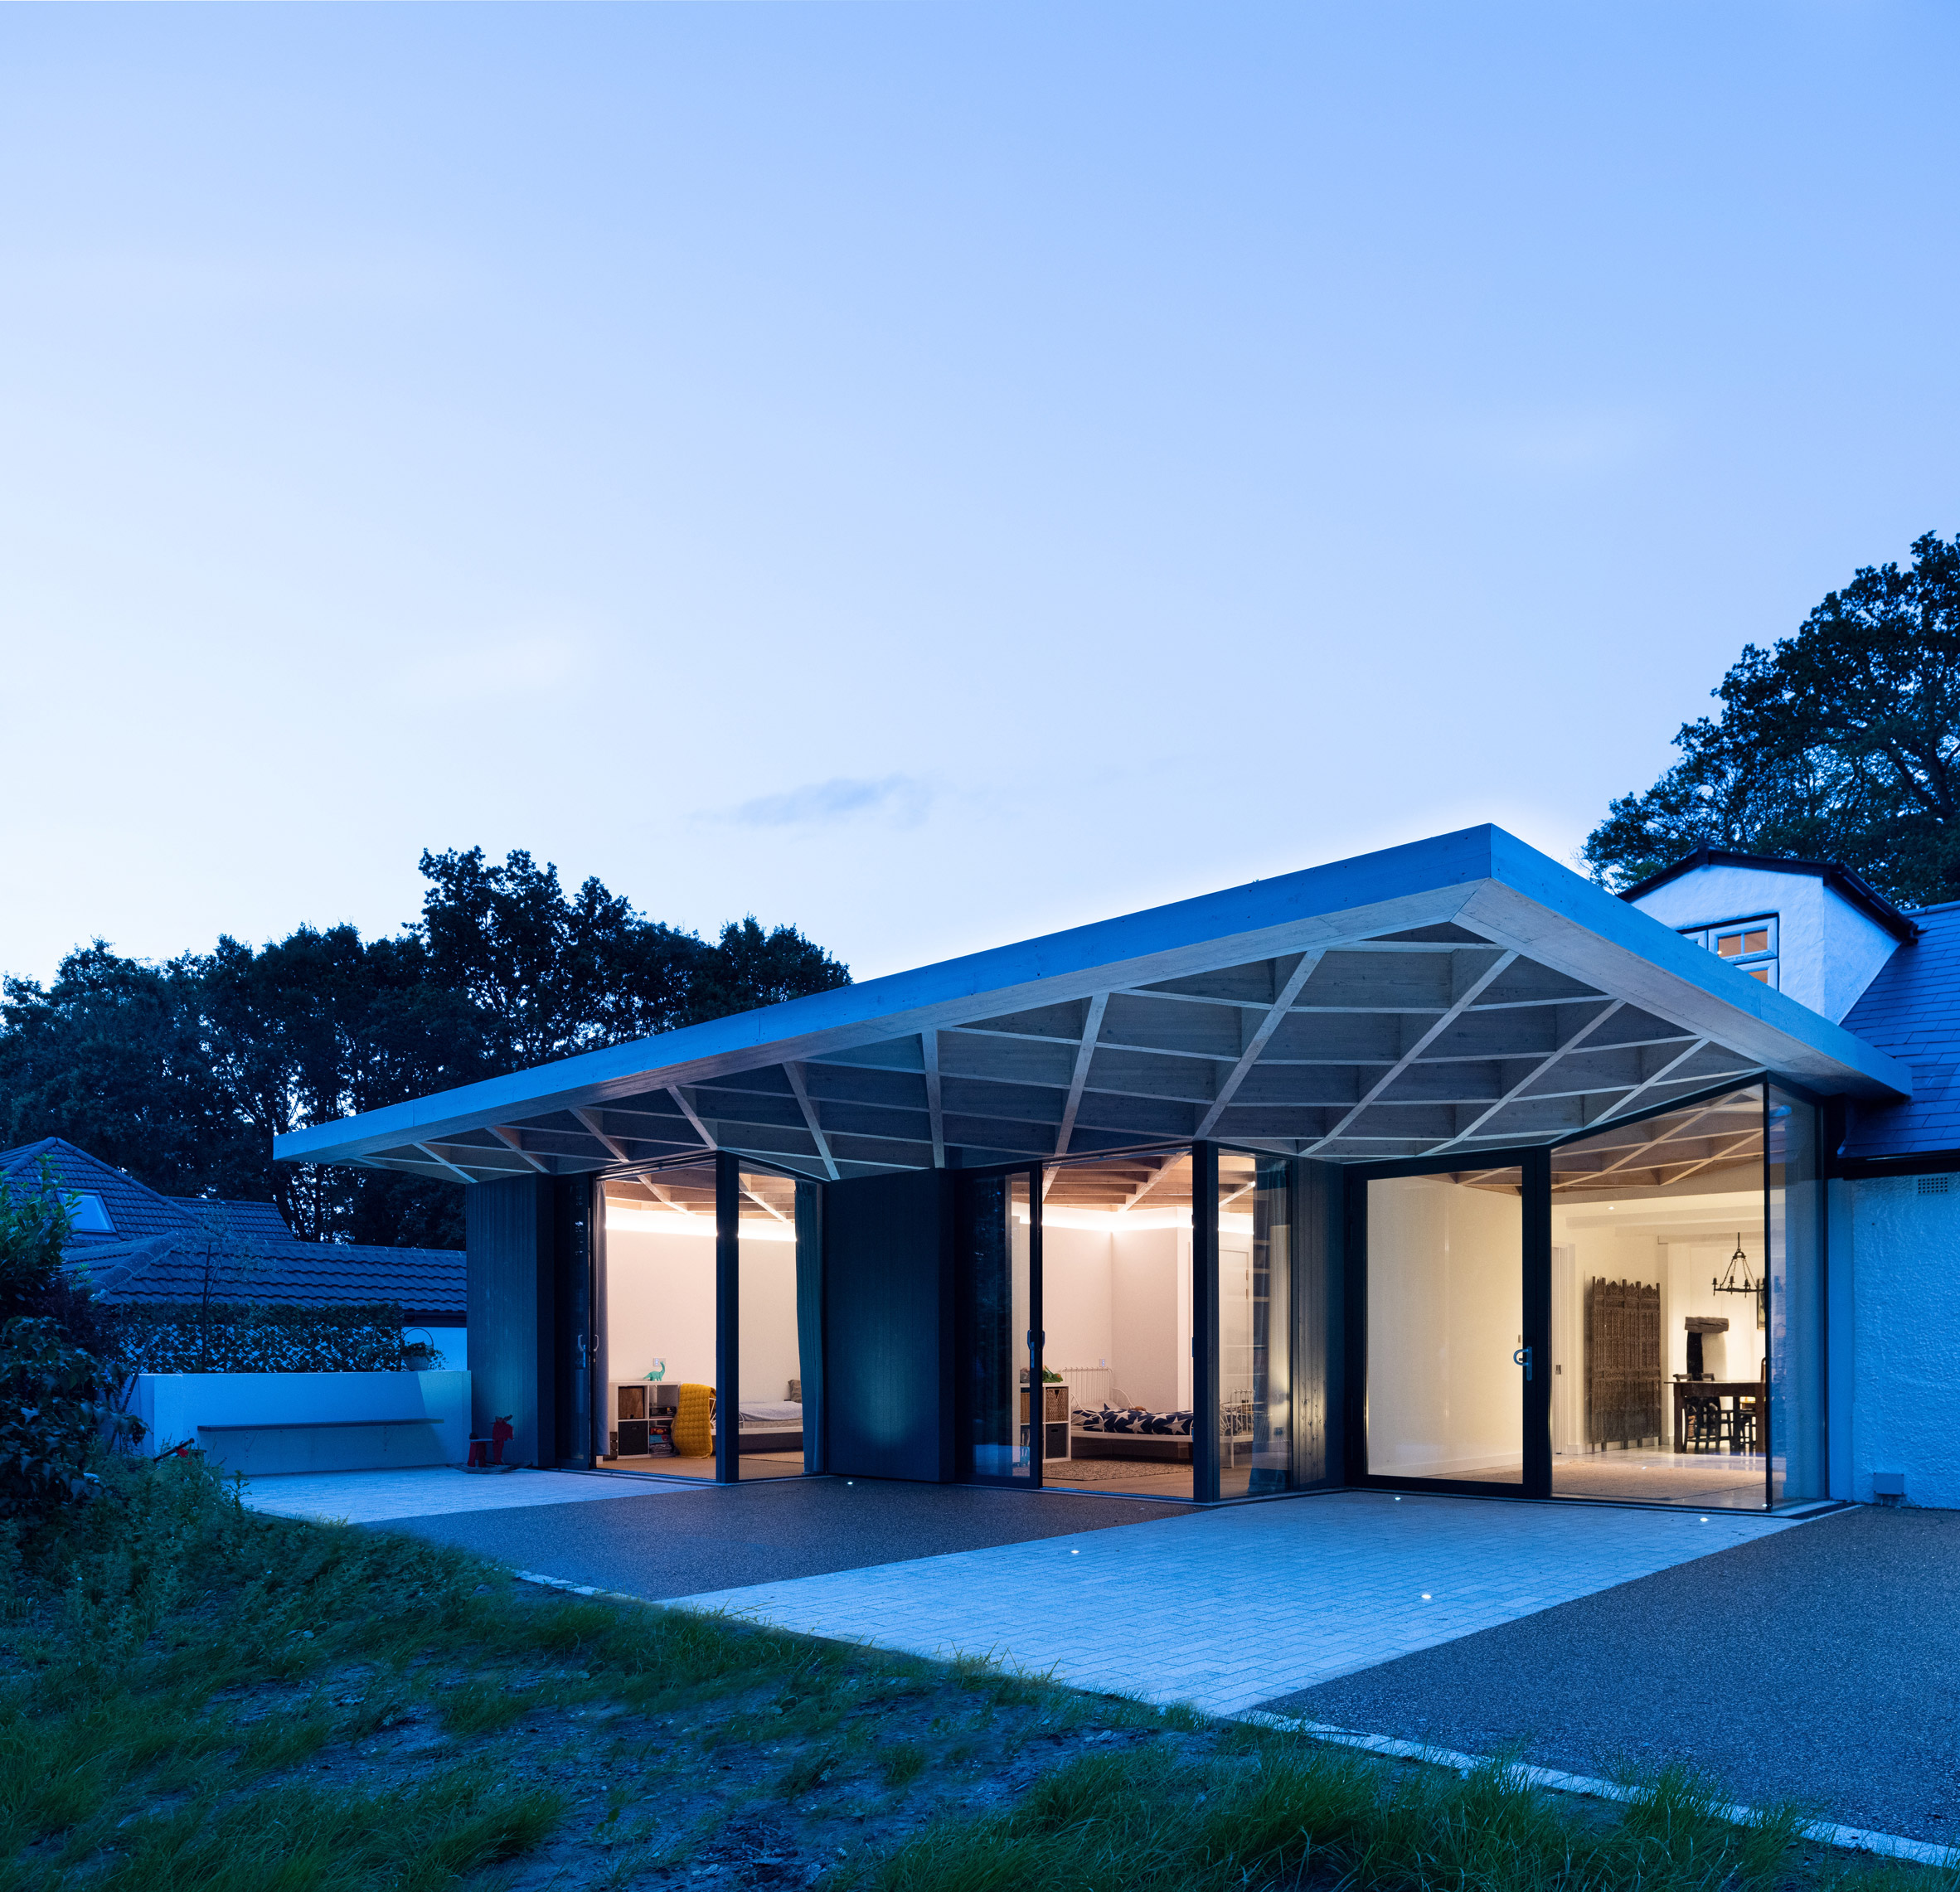 Night view of House for Theo and Oskar by Tigg + Coll